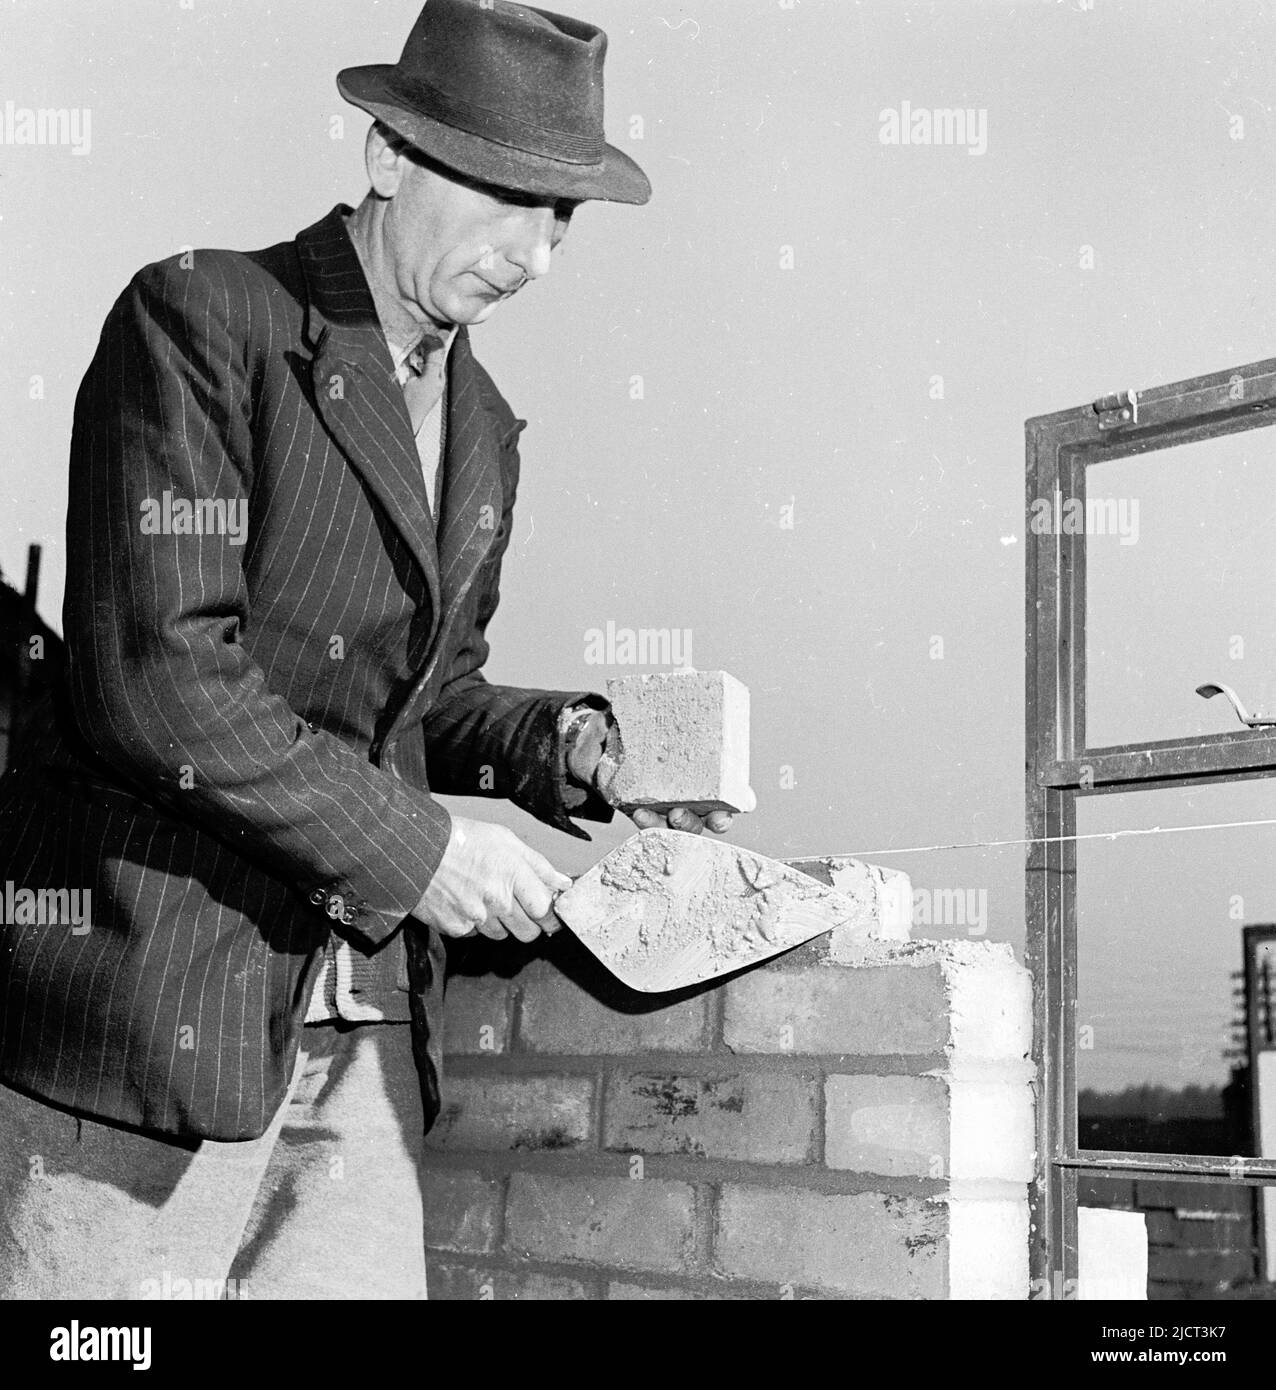 1950s, historical, elderly bricklayer wearing a shirt & tie, a pin-striped jacket and hat, trowel in hand, building a wall, England, UK. Stock Photo